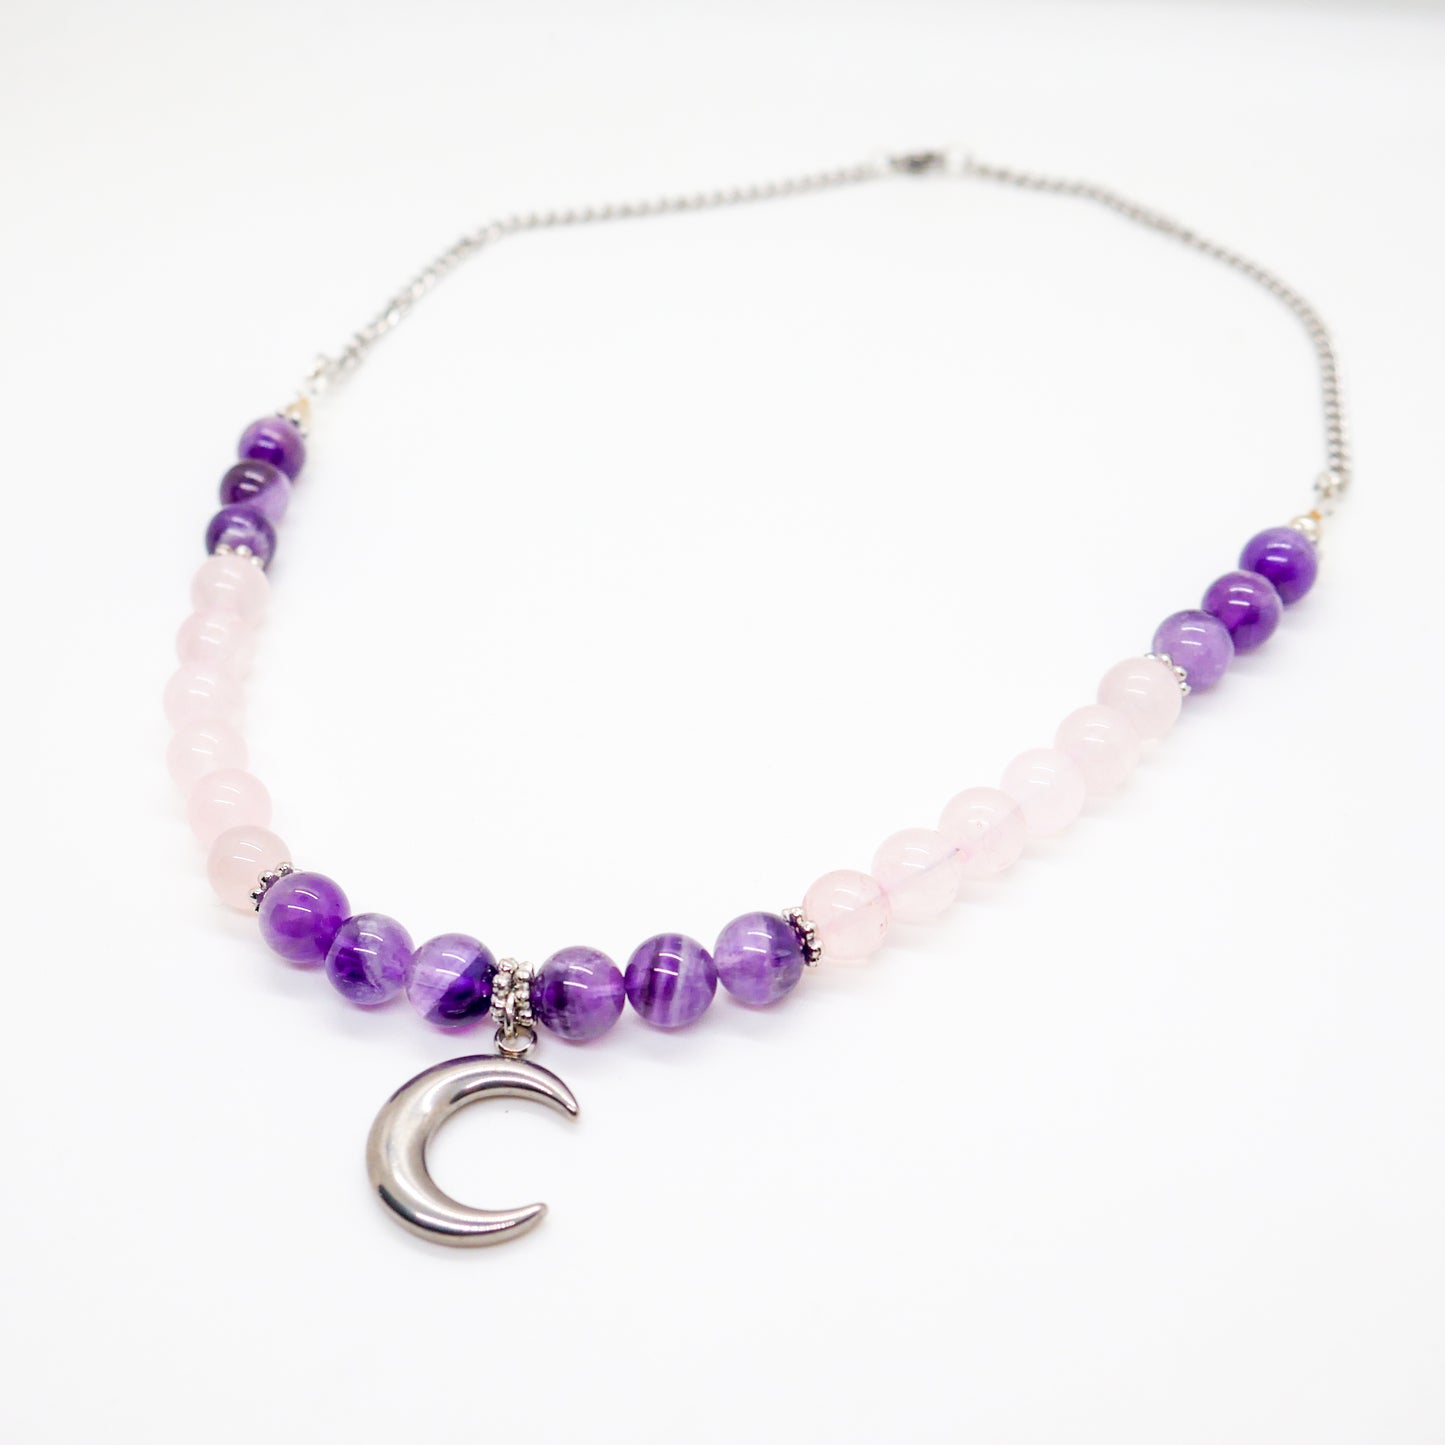 Cotton Candy Sky Moon Necklace